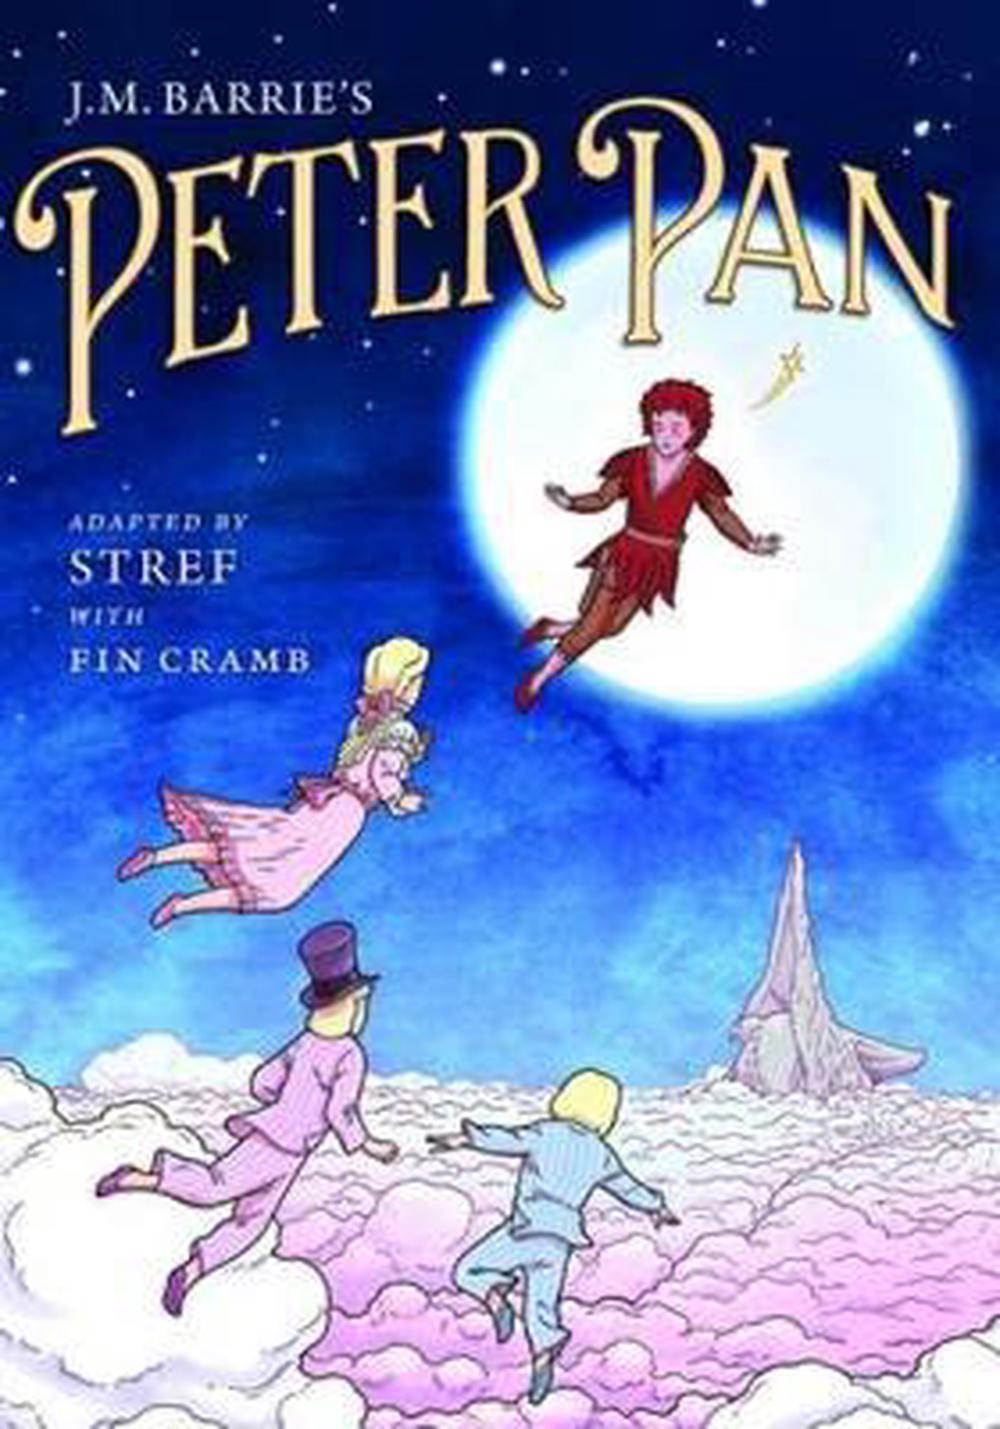 J.m. Barrie's Peter Pan: The Graphic Novel by Stephen White (English ...